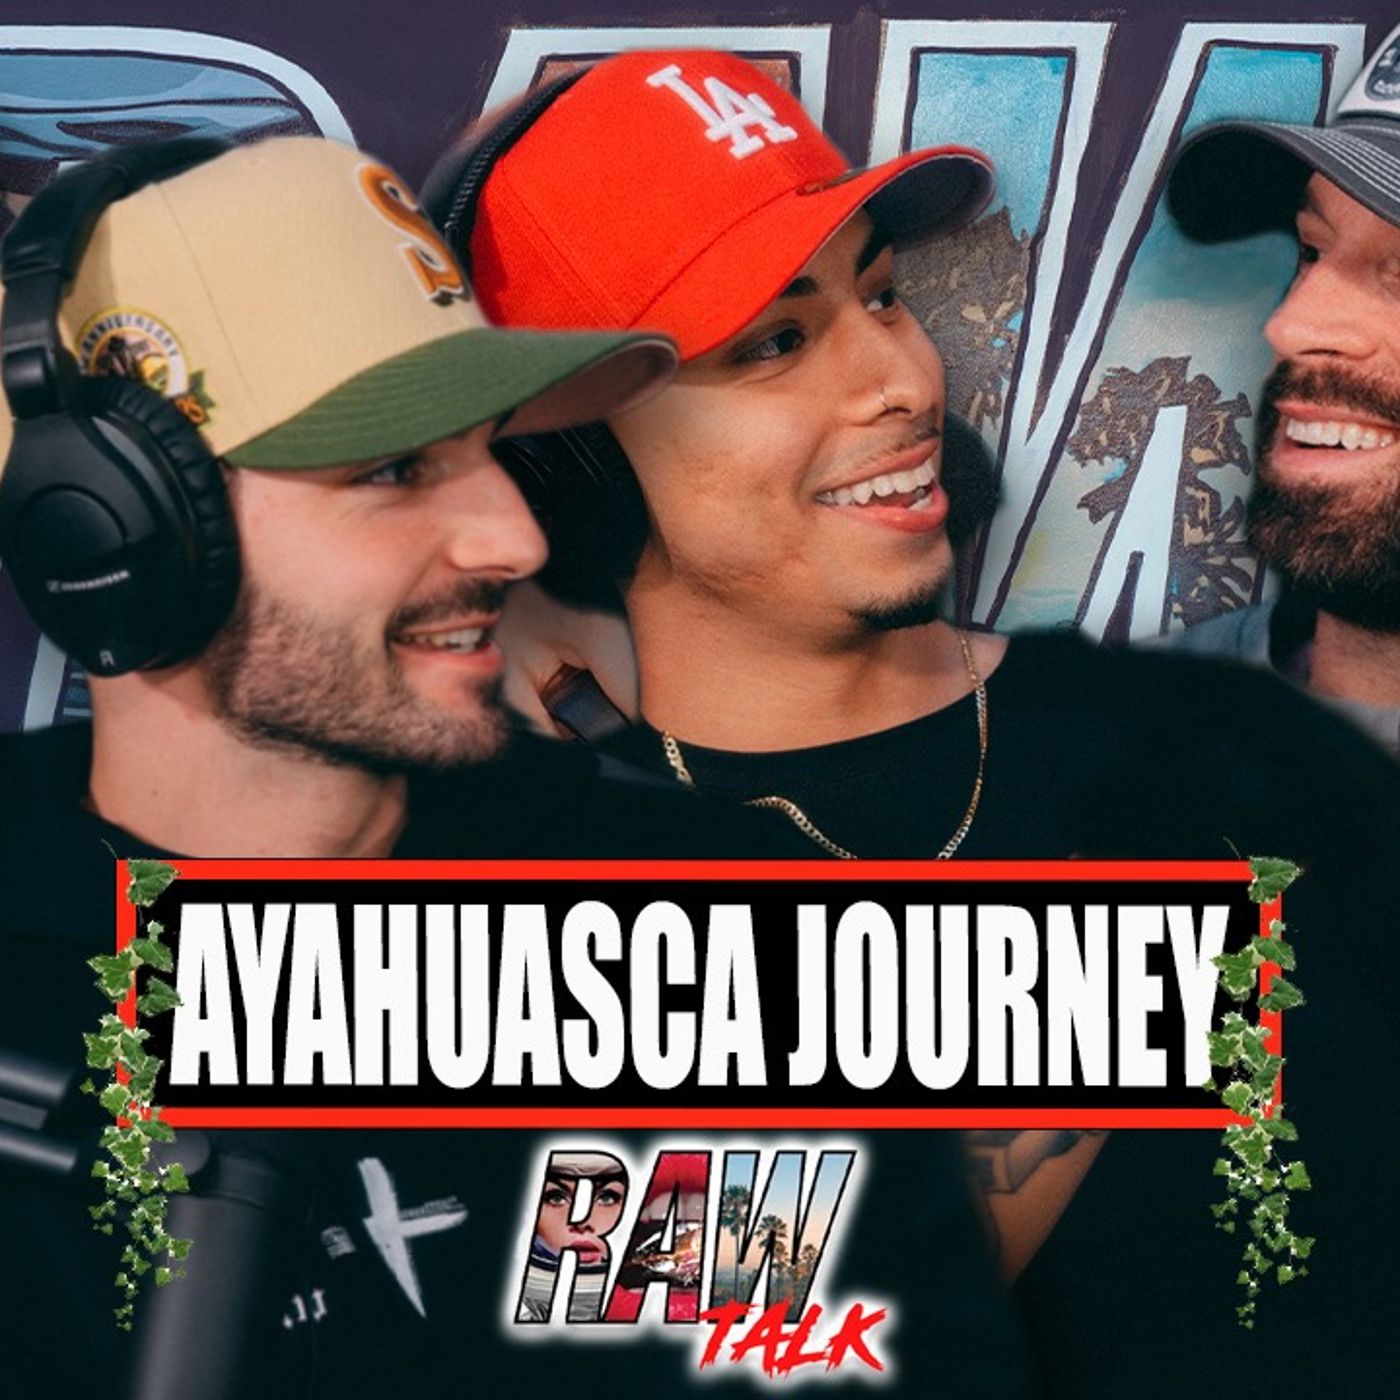 BRADLEY MARTYN ON HIS AYAHUASCA TRIP, ANDREW TATE OFF CAMERAS & ELON MUSK’S TWITTER